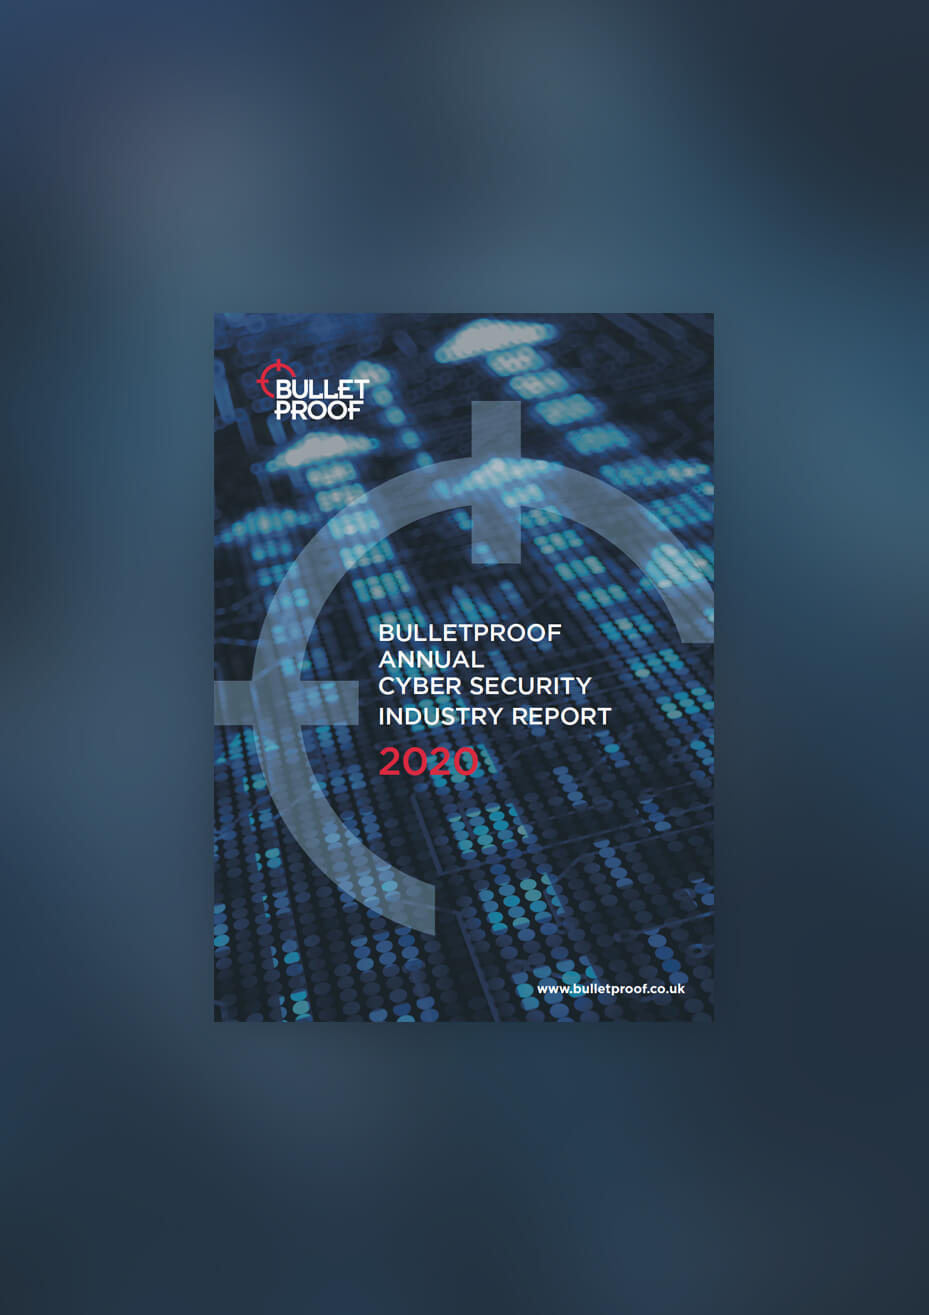 Bulletproof Annual Cyber Security Report 2020